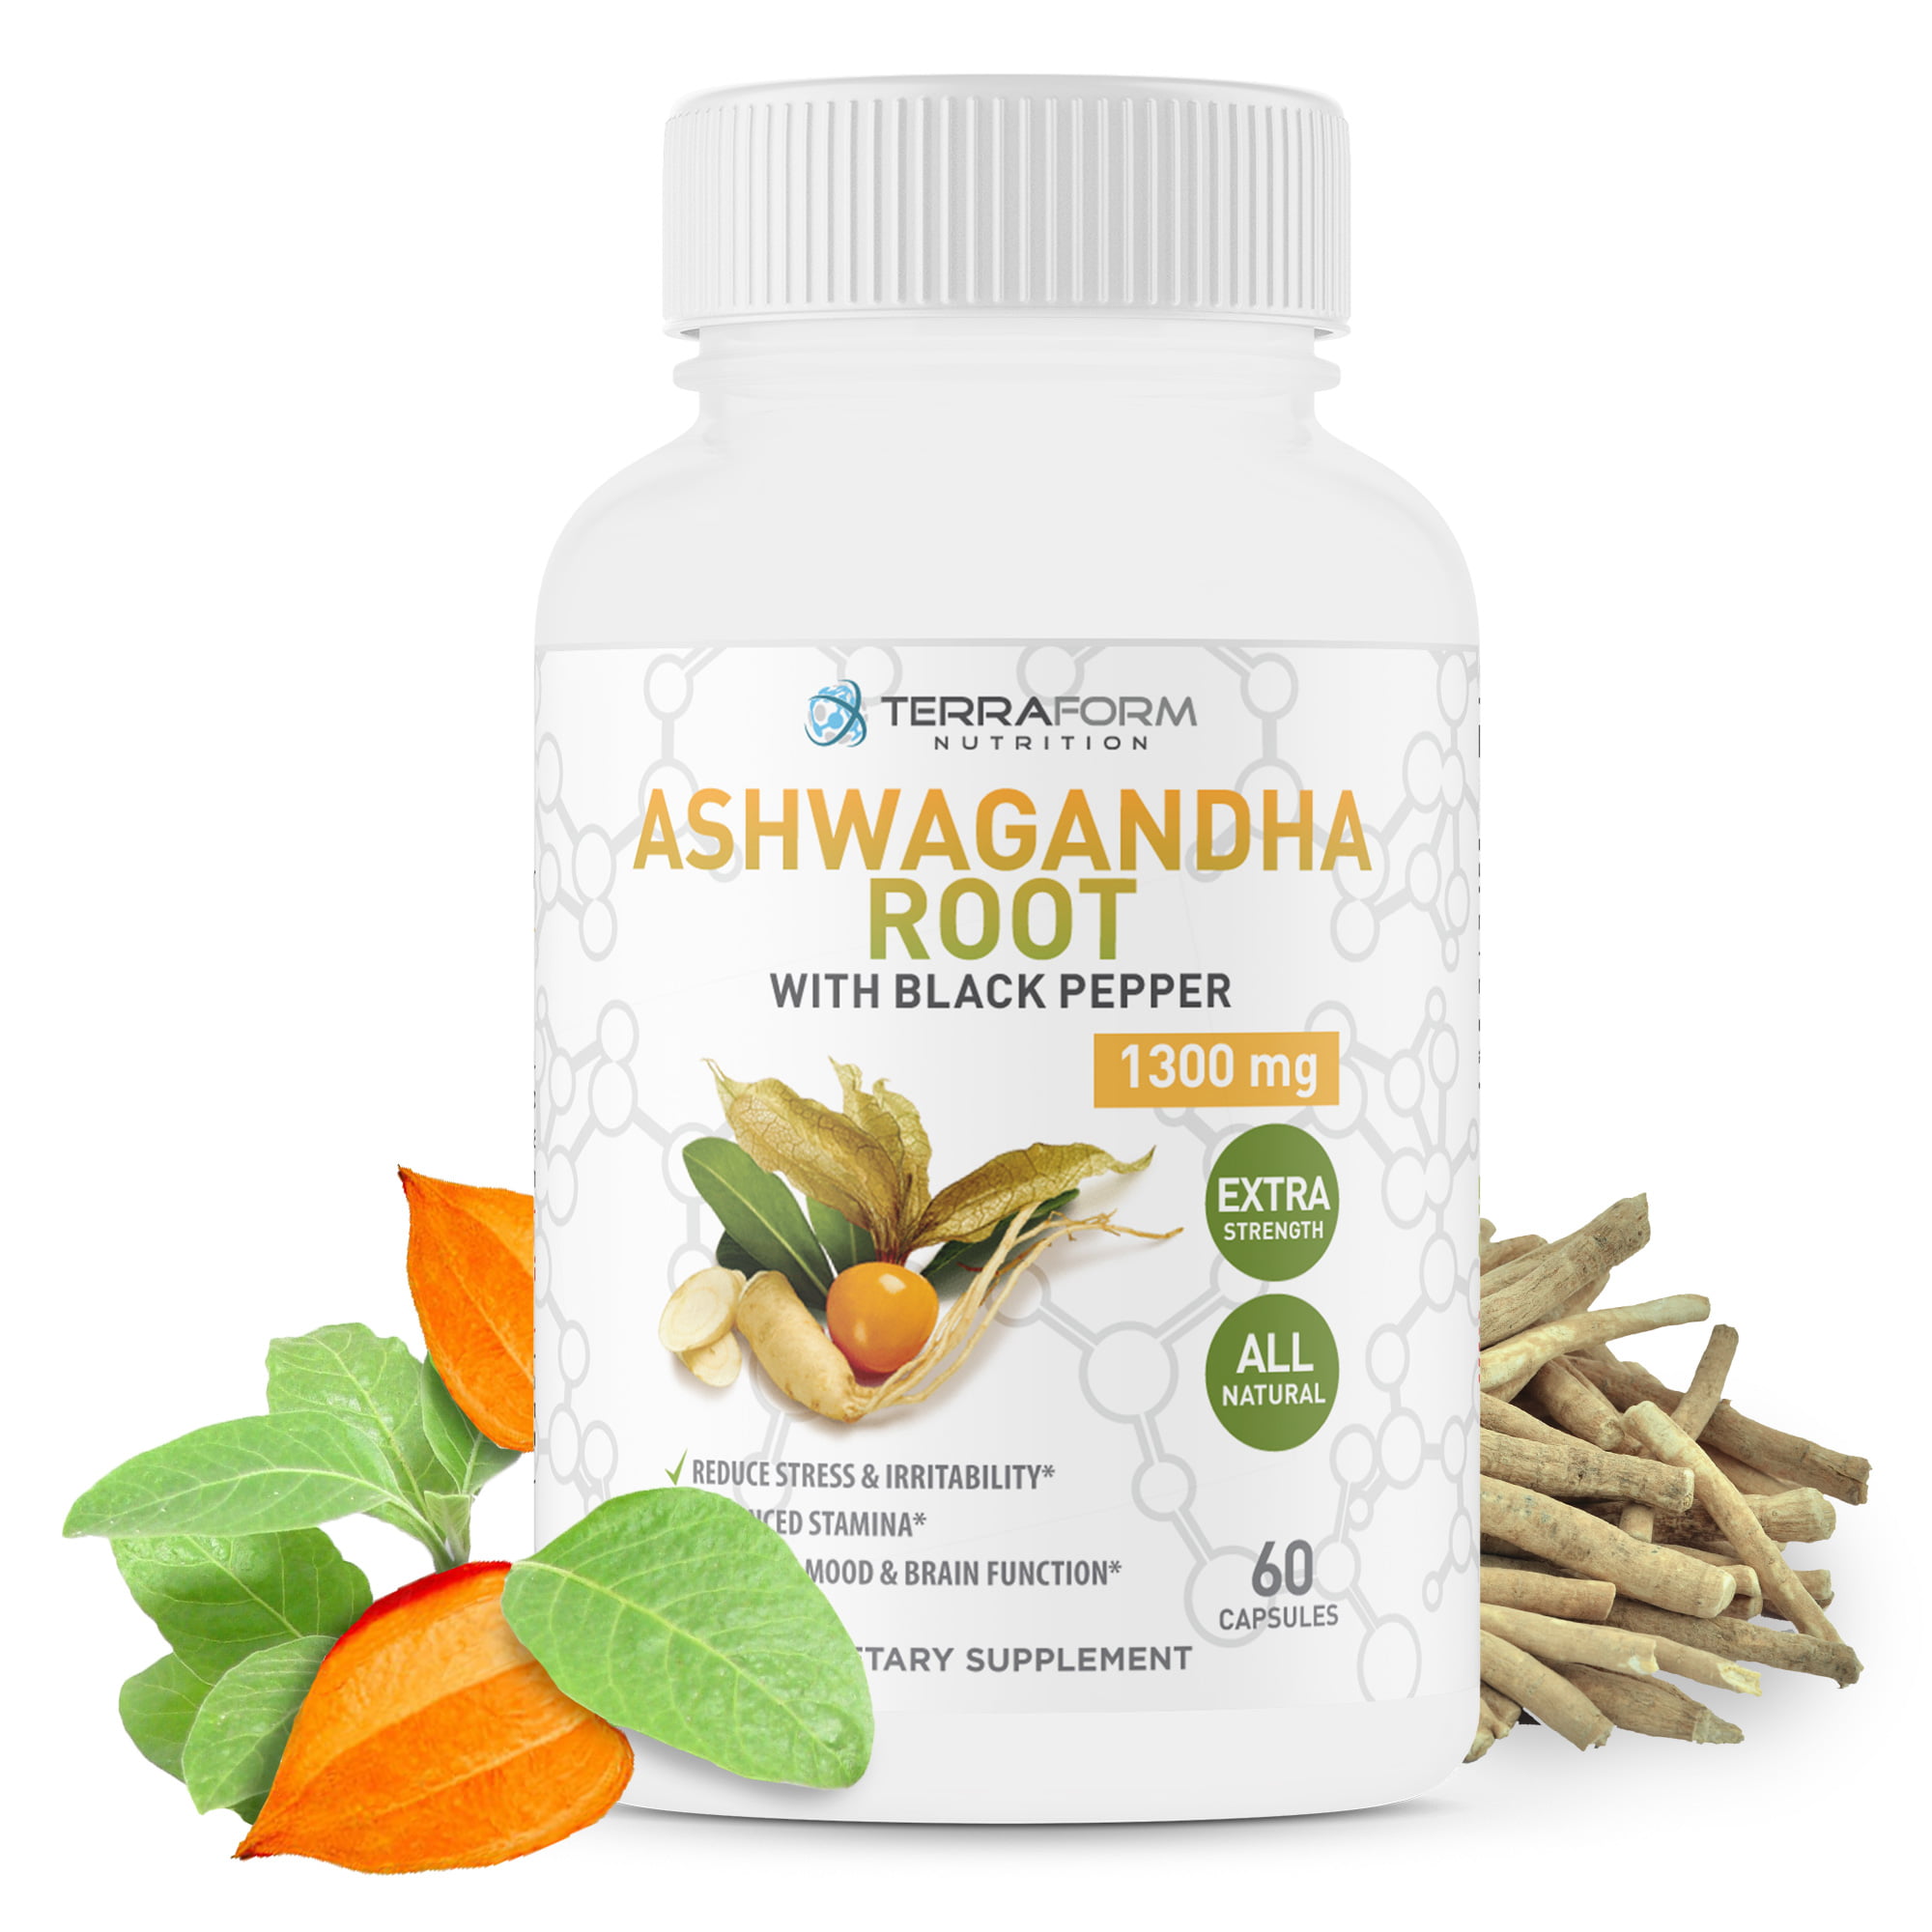 Ashwagandha Supplement Capsules With Black Pepper Stress Anxiety